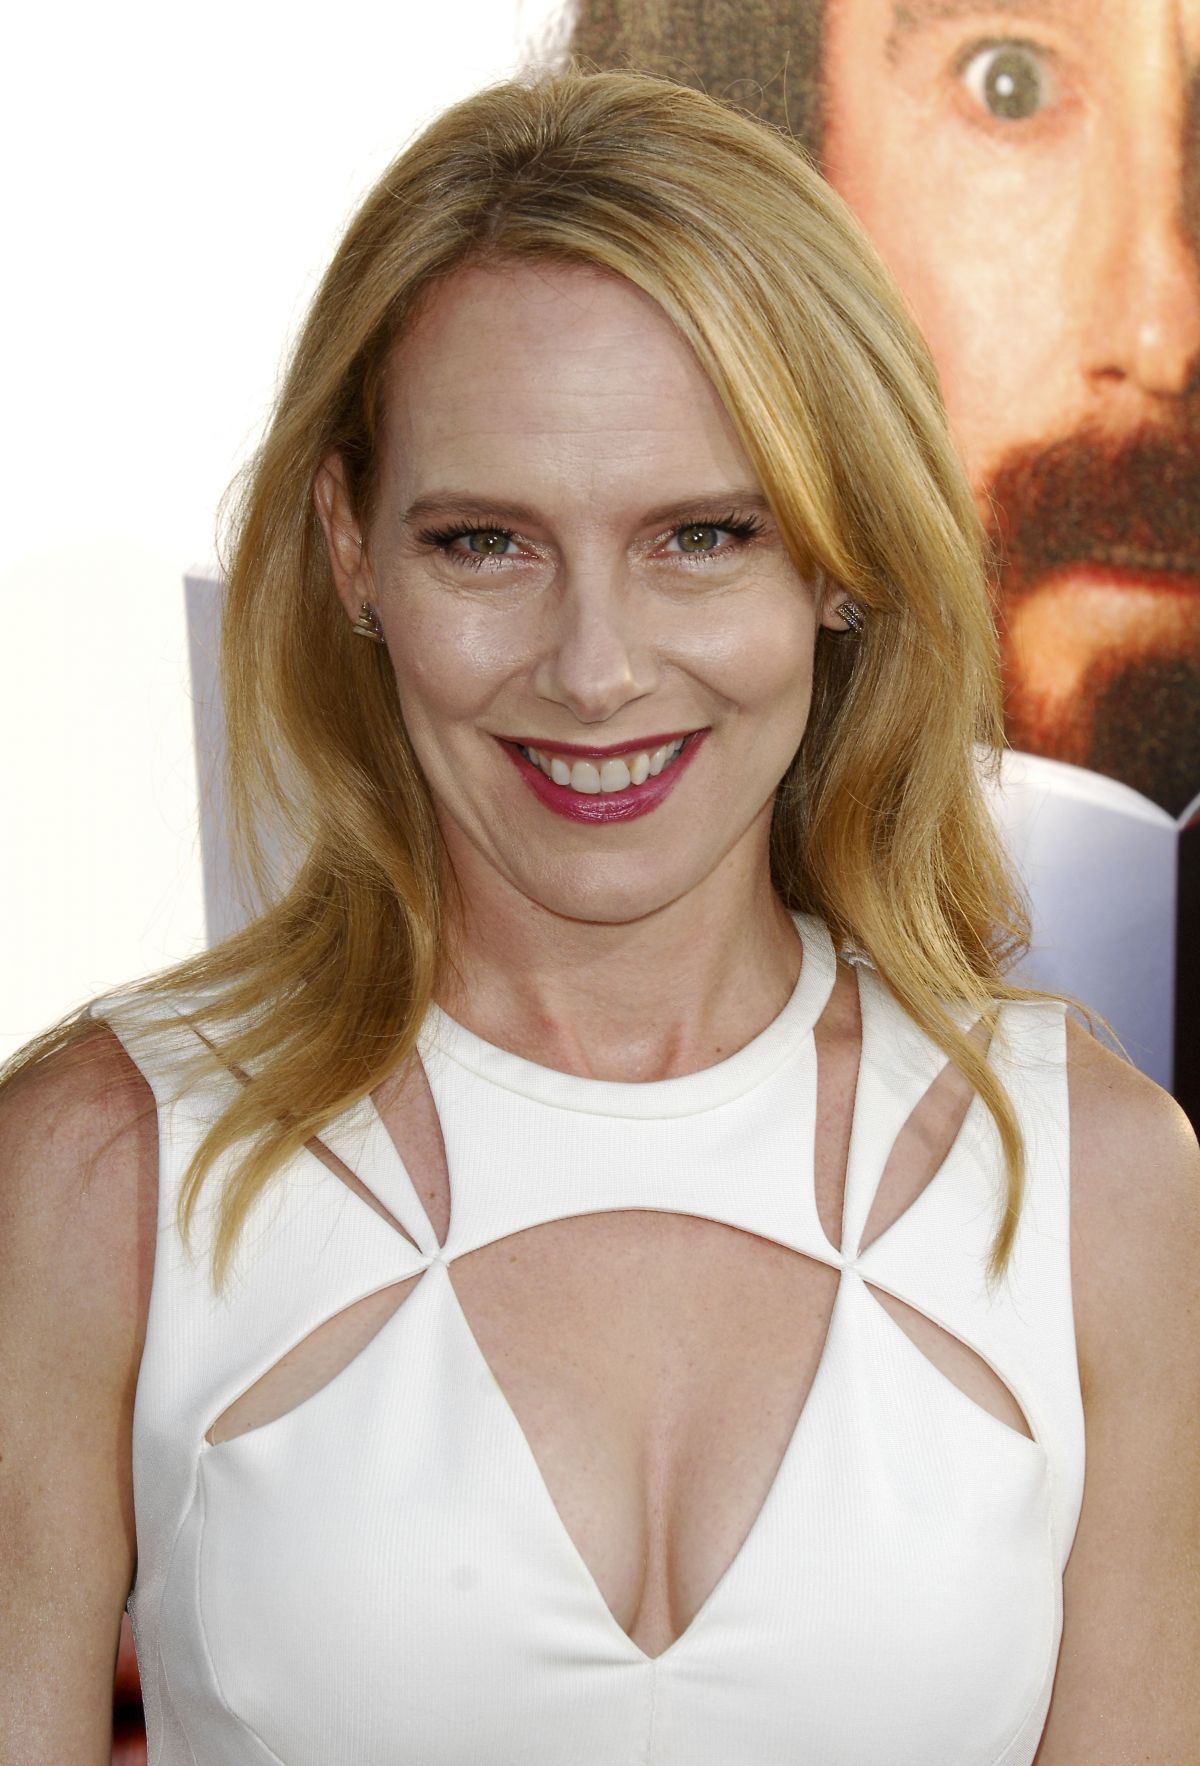 Pictures of Amy Ryan, Picture #299103 - Pictures Of Celebrities